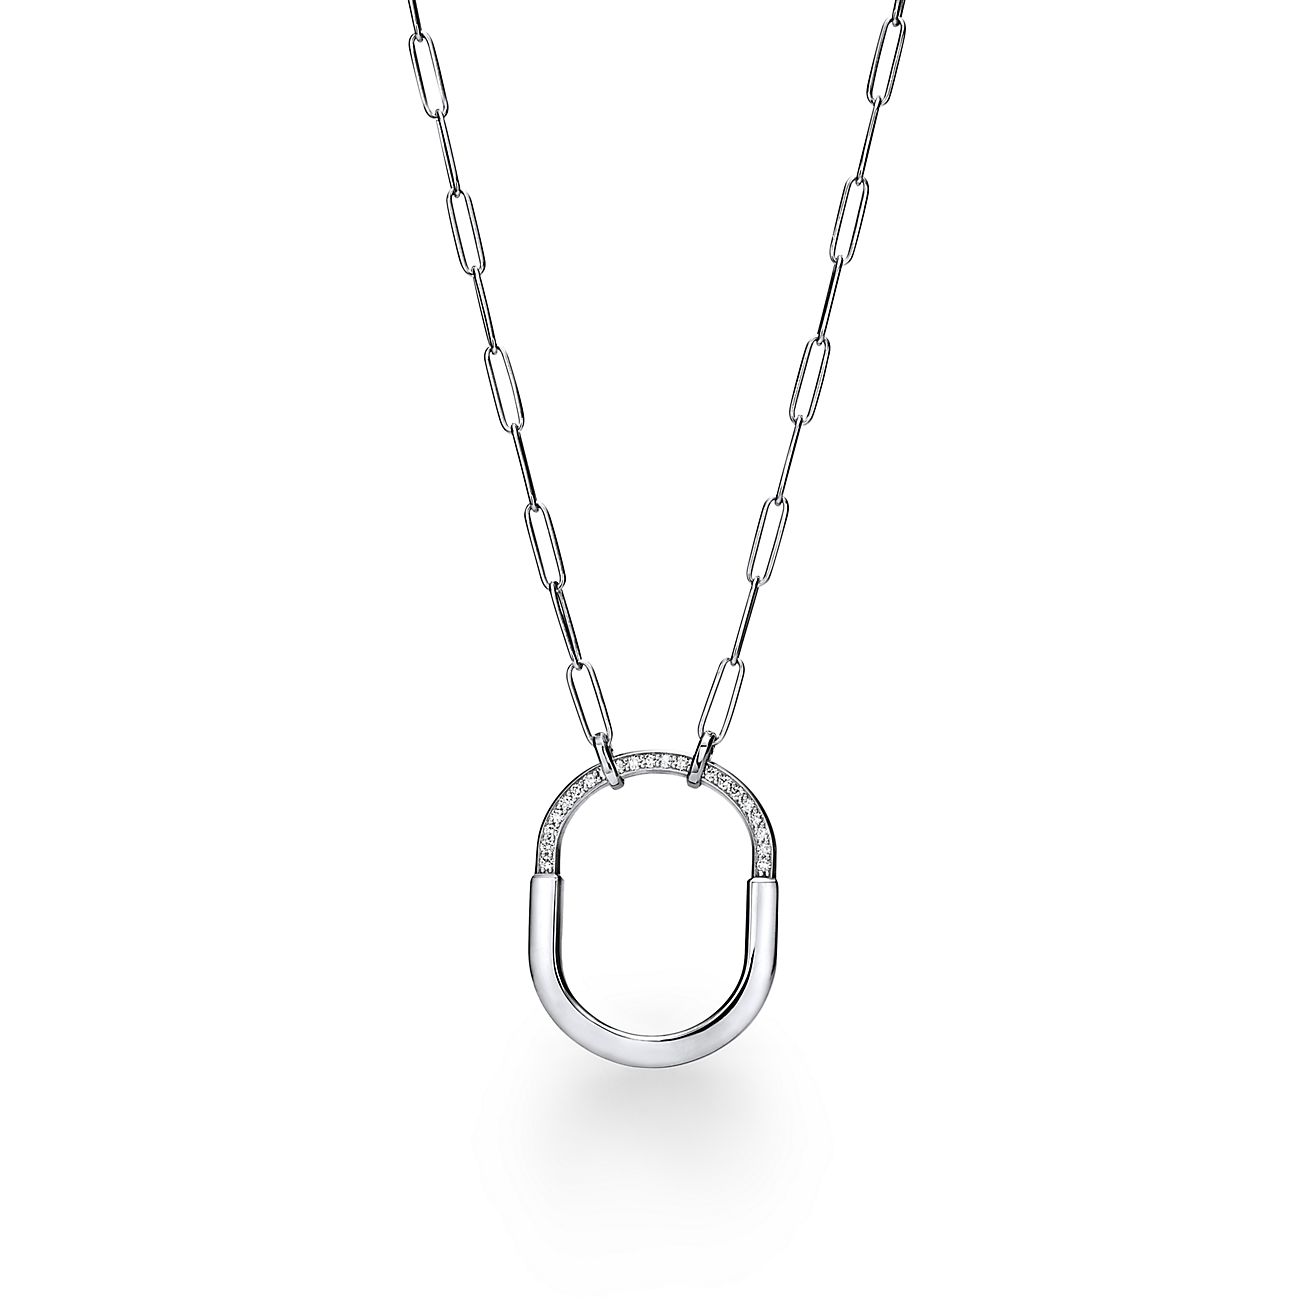 Tiffany Lock Pendant in White Gold with Diamonds, Large